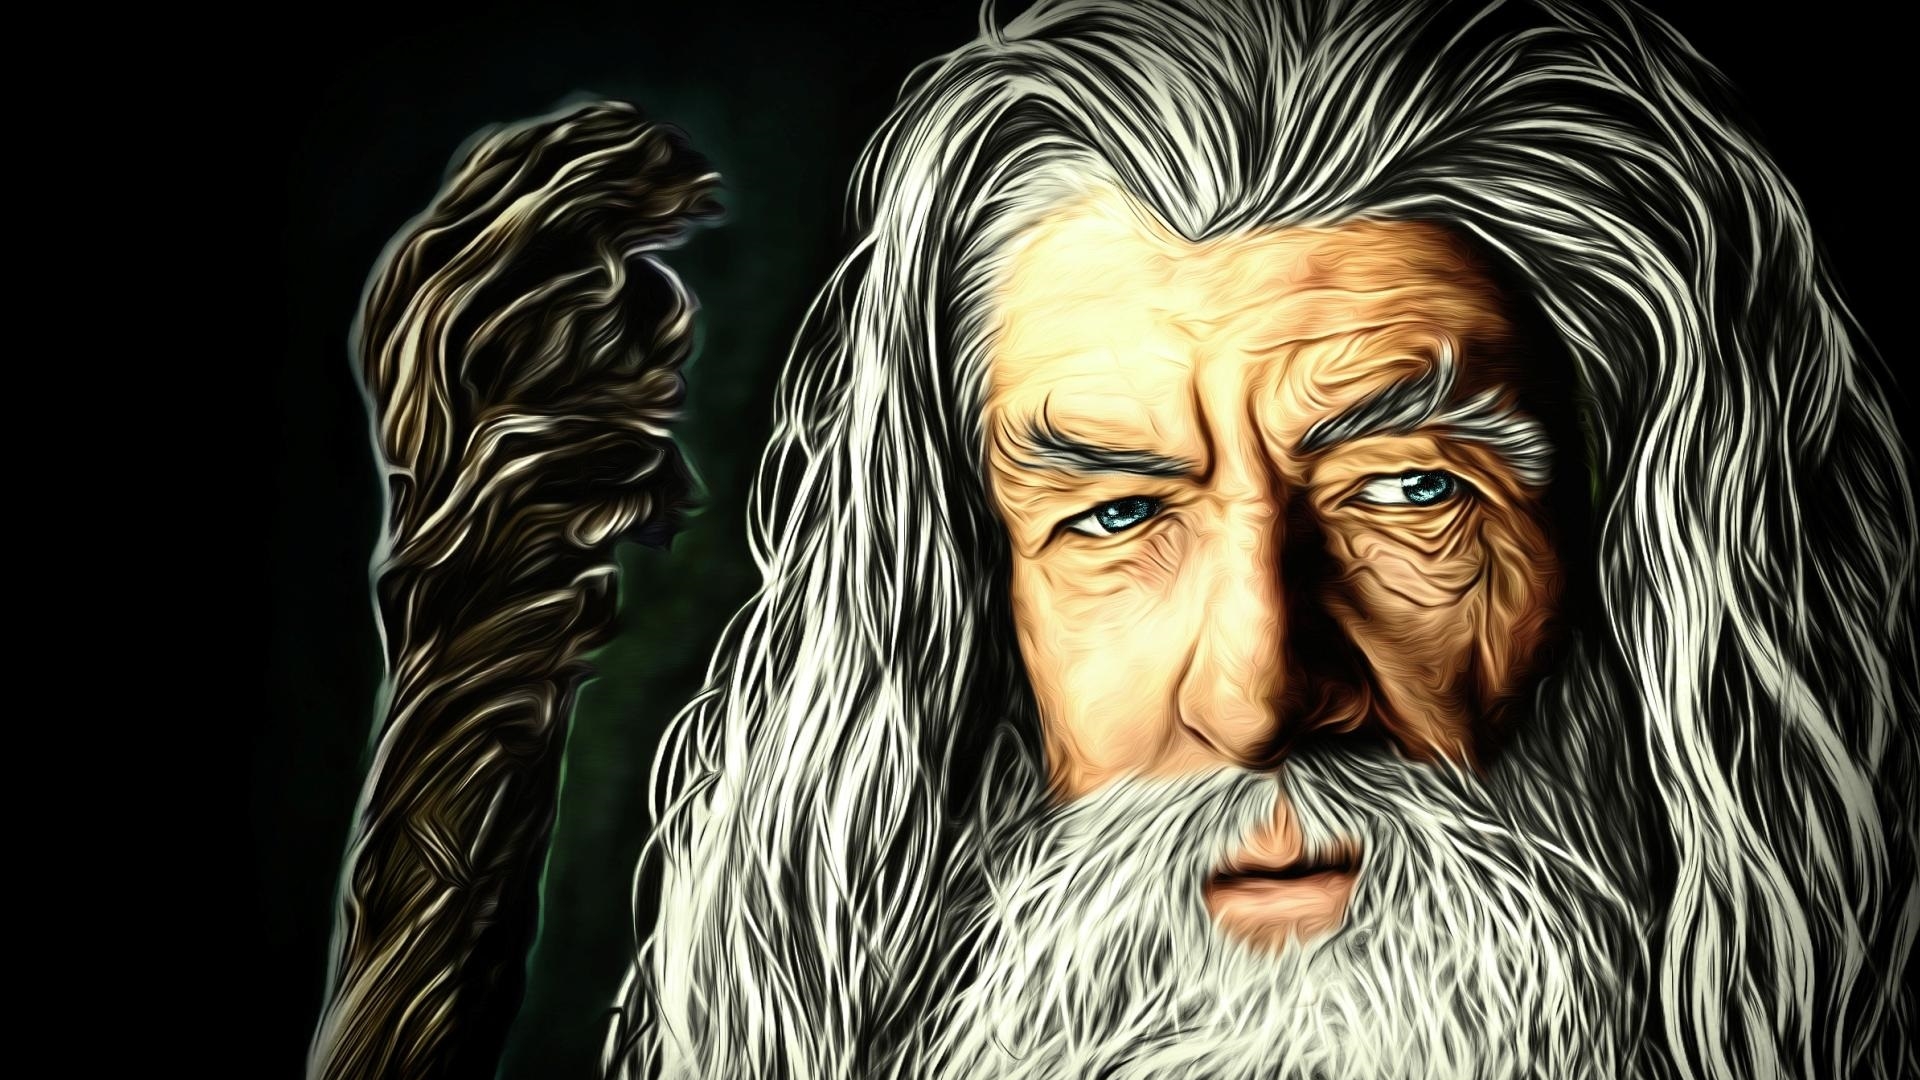 Gandalf - The Lord of The Rings / The Fellowship of the Ring 2K wallpaper  download